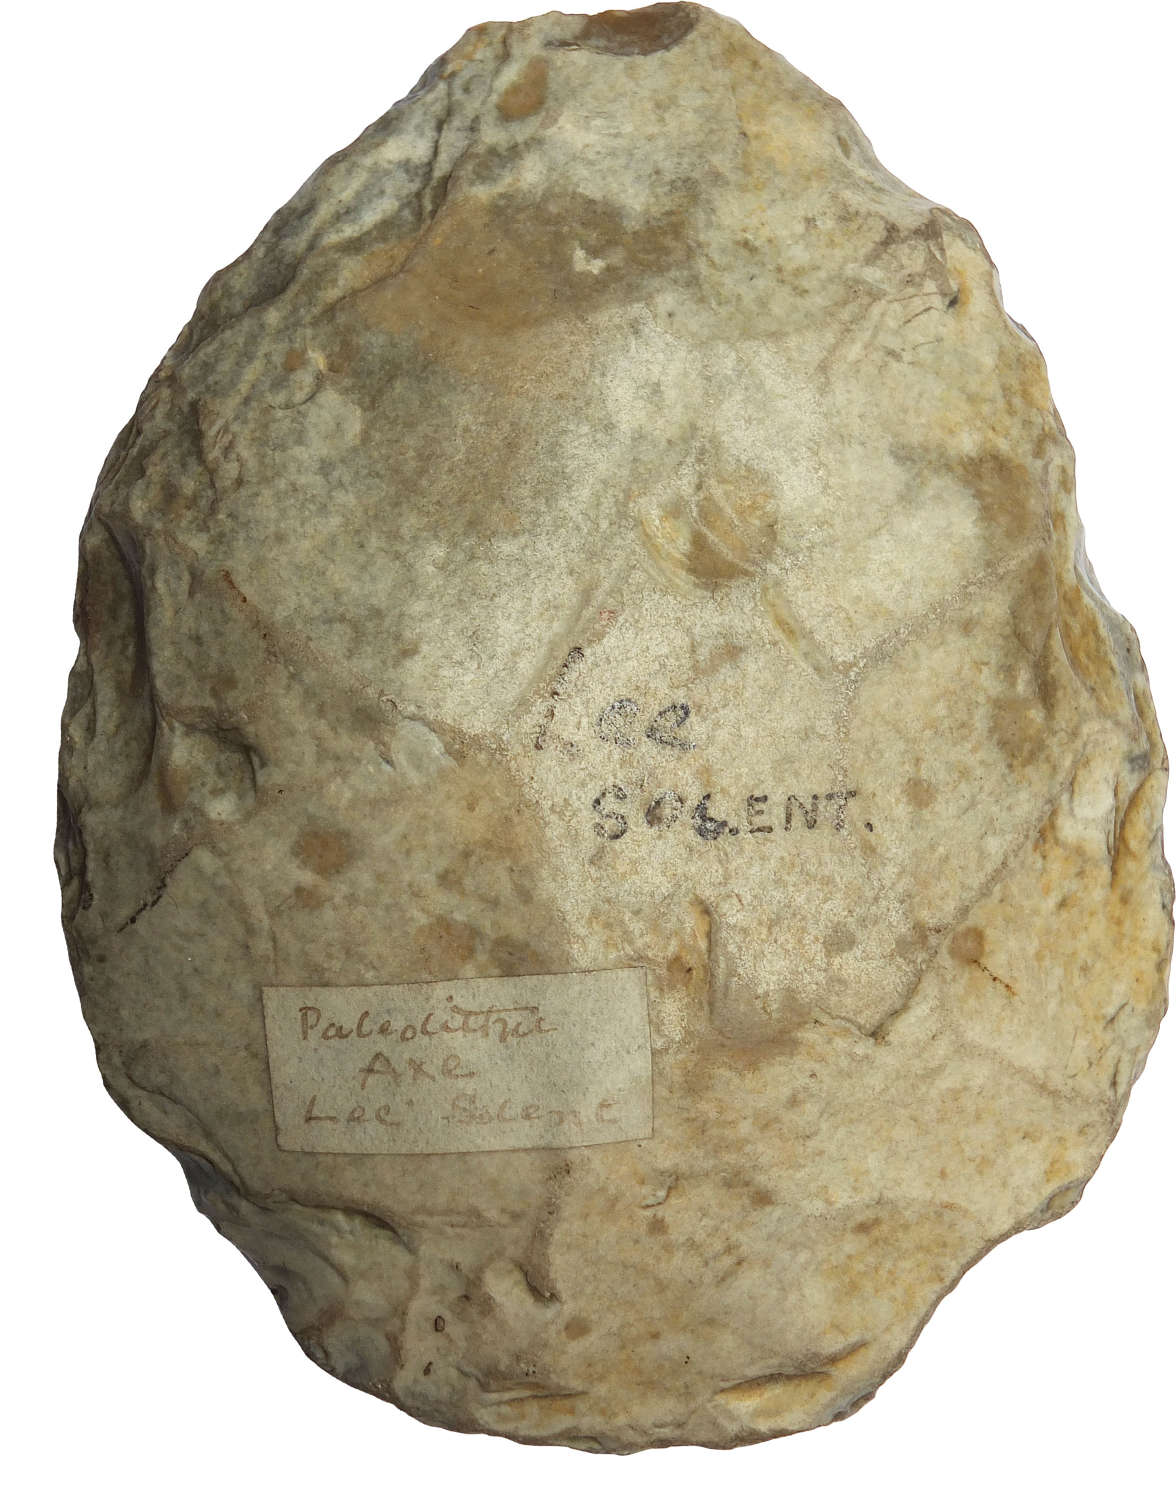 A Lower Palaeolithic ovate handaxe found at Lee-on-Solent, Hampshire